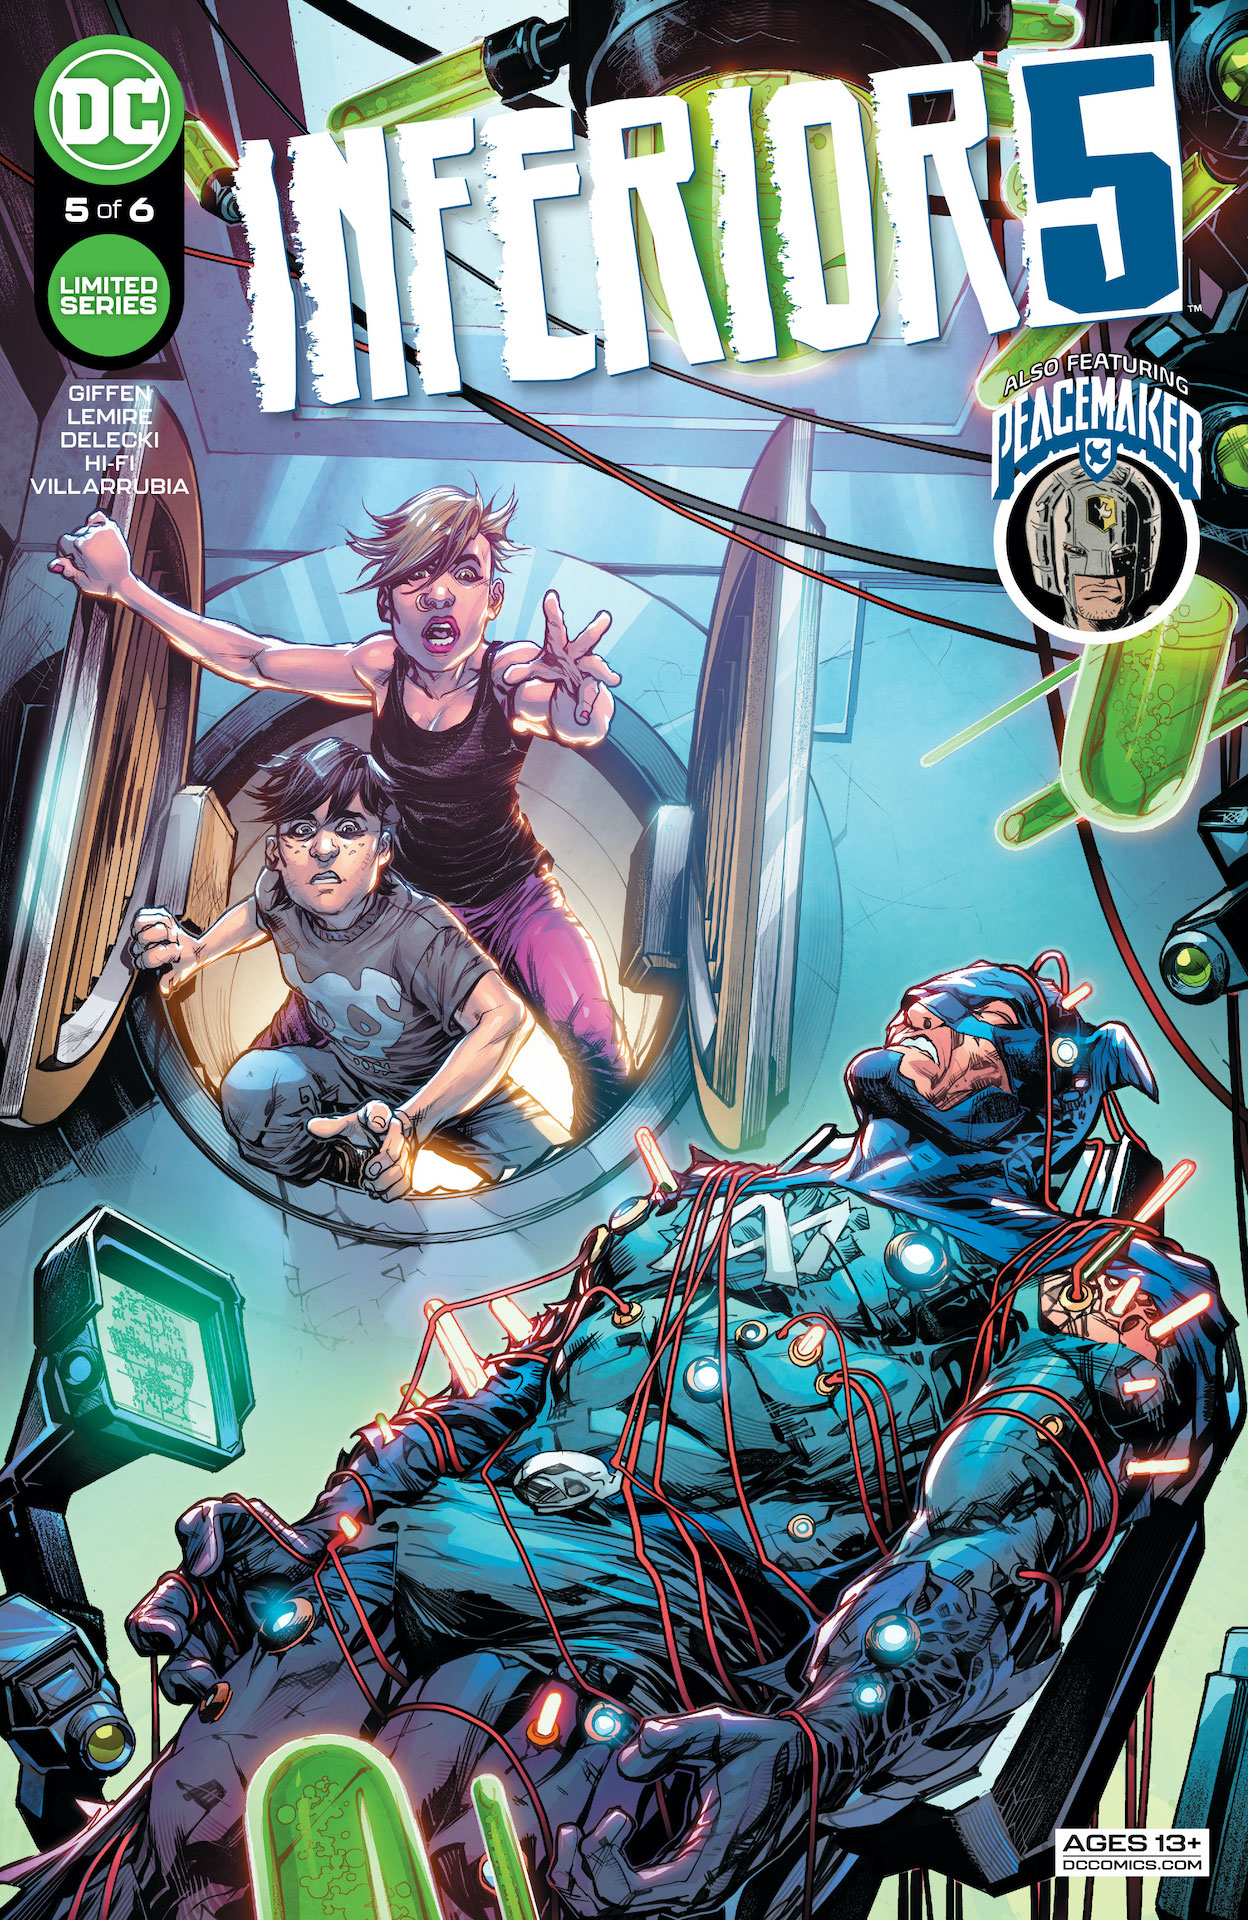 DC Preview: Inferior Five #5